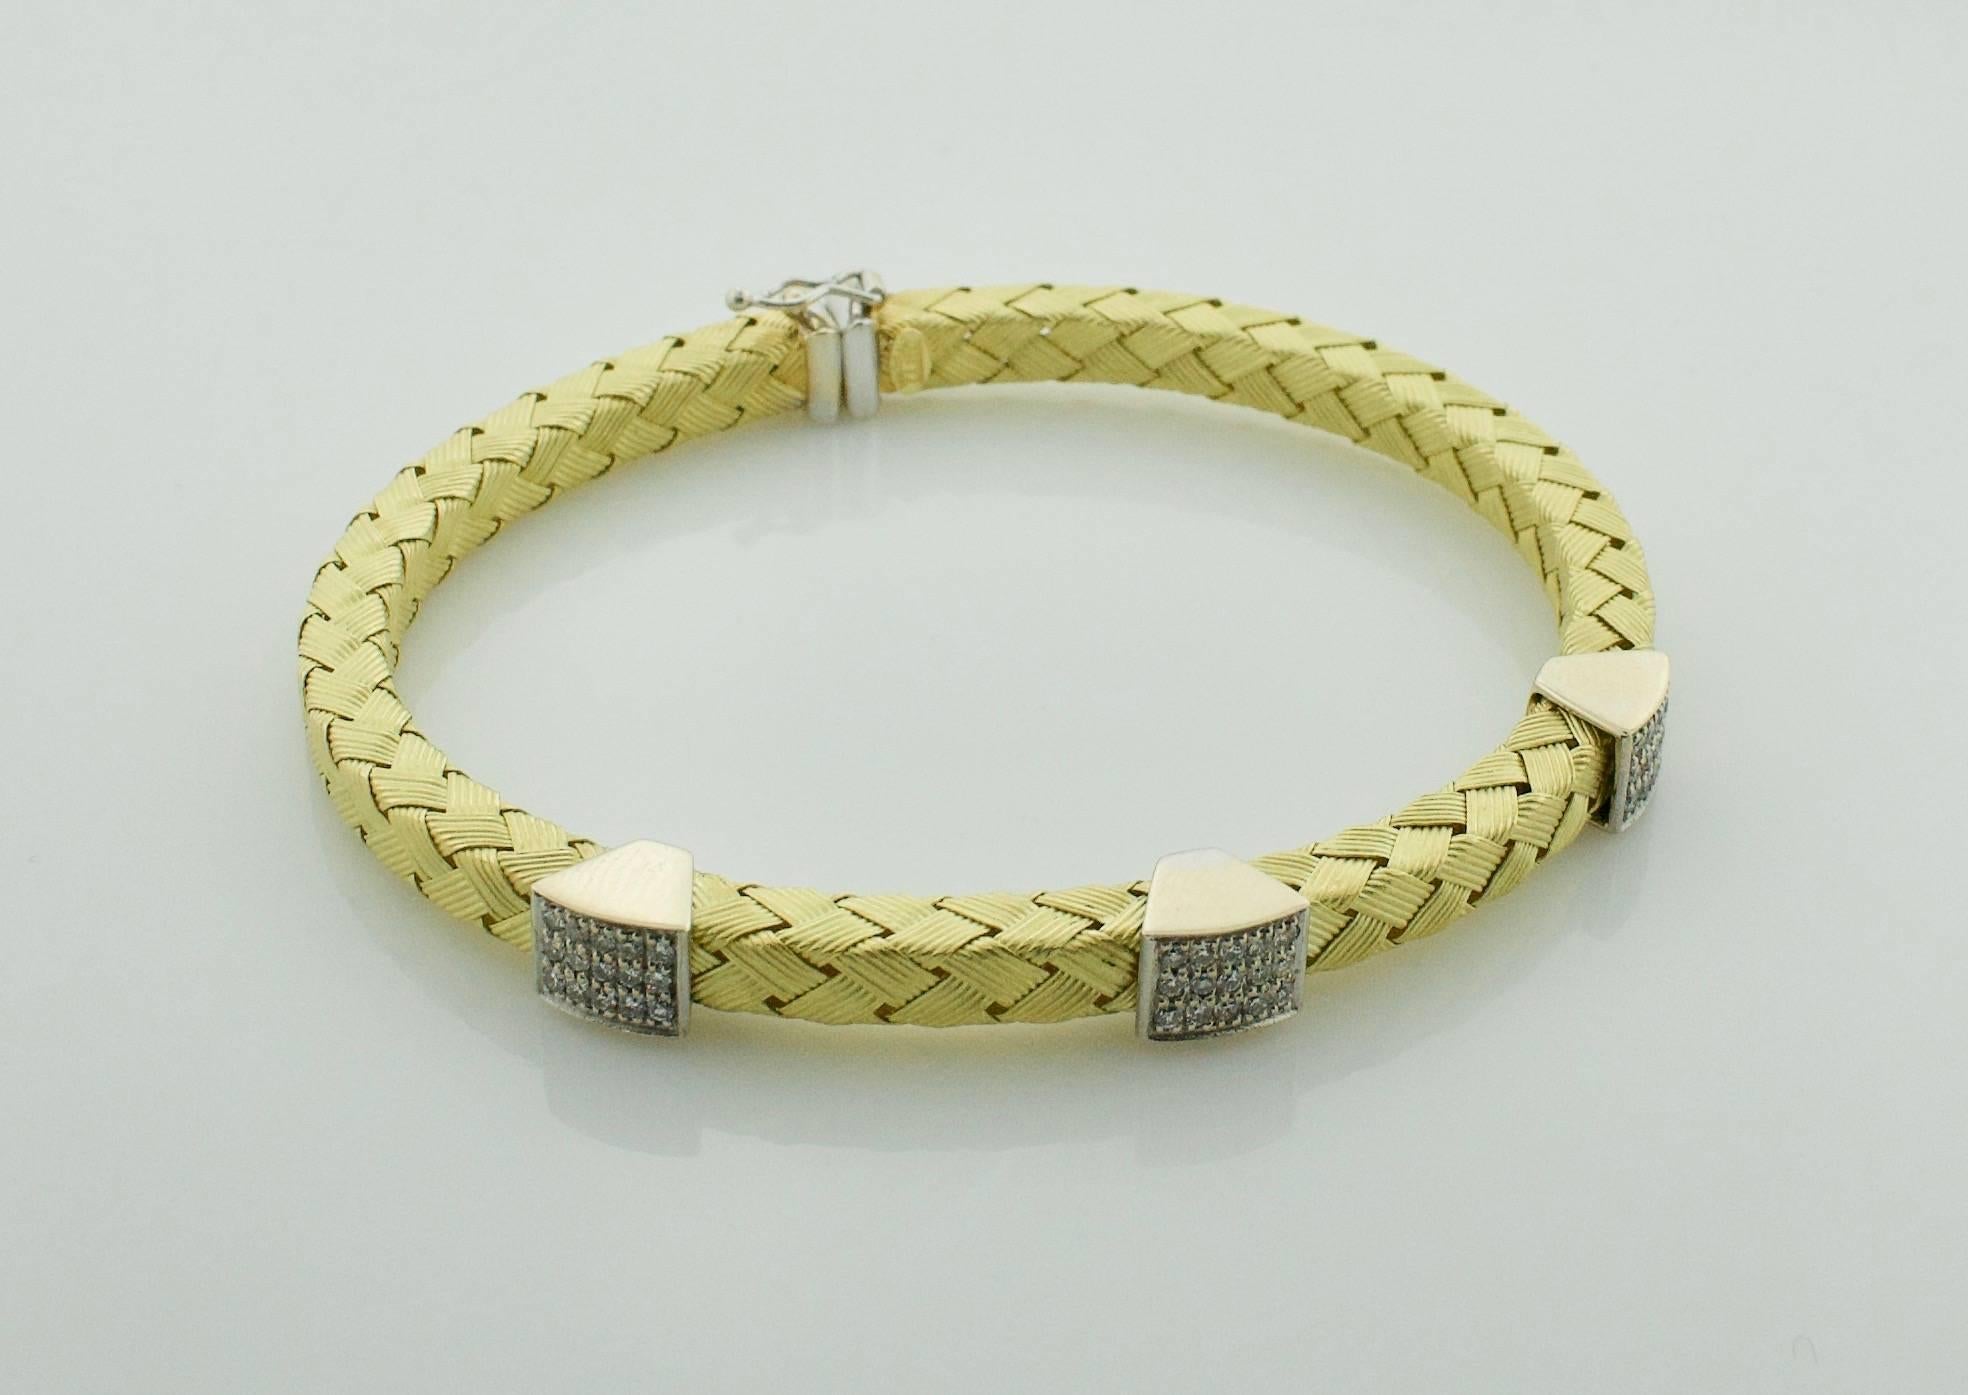 Flexible Diamond 18k Yellow Gold Bracelet
Forty Five Round Brilliant Cut Diamonds weighing .35 carats approximately [GH VVS-VS1]
In Perfect Condition